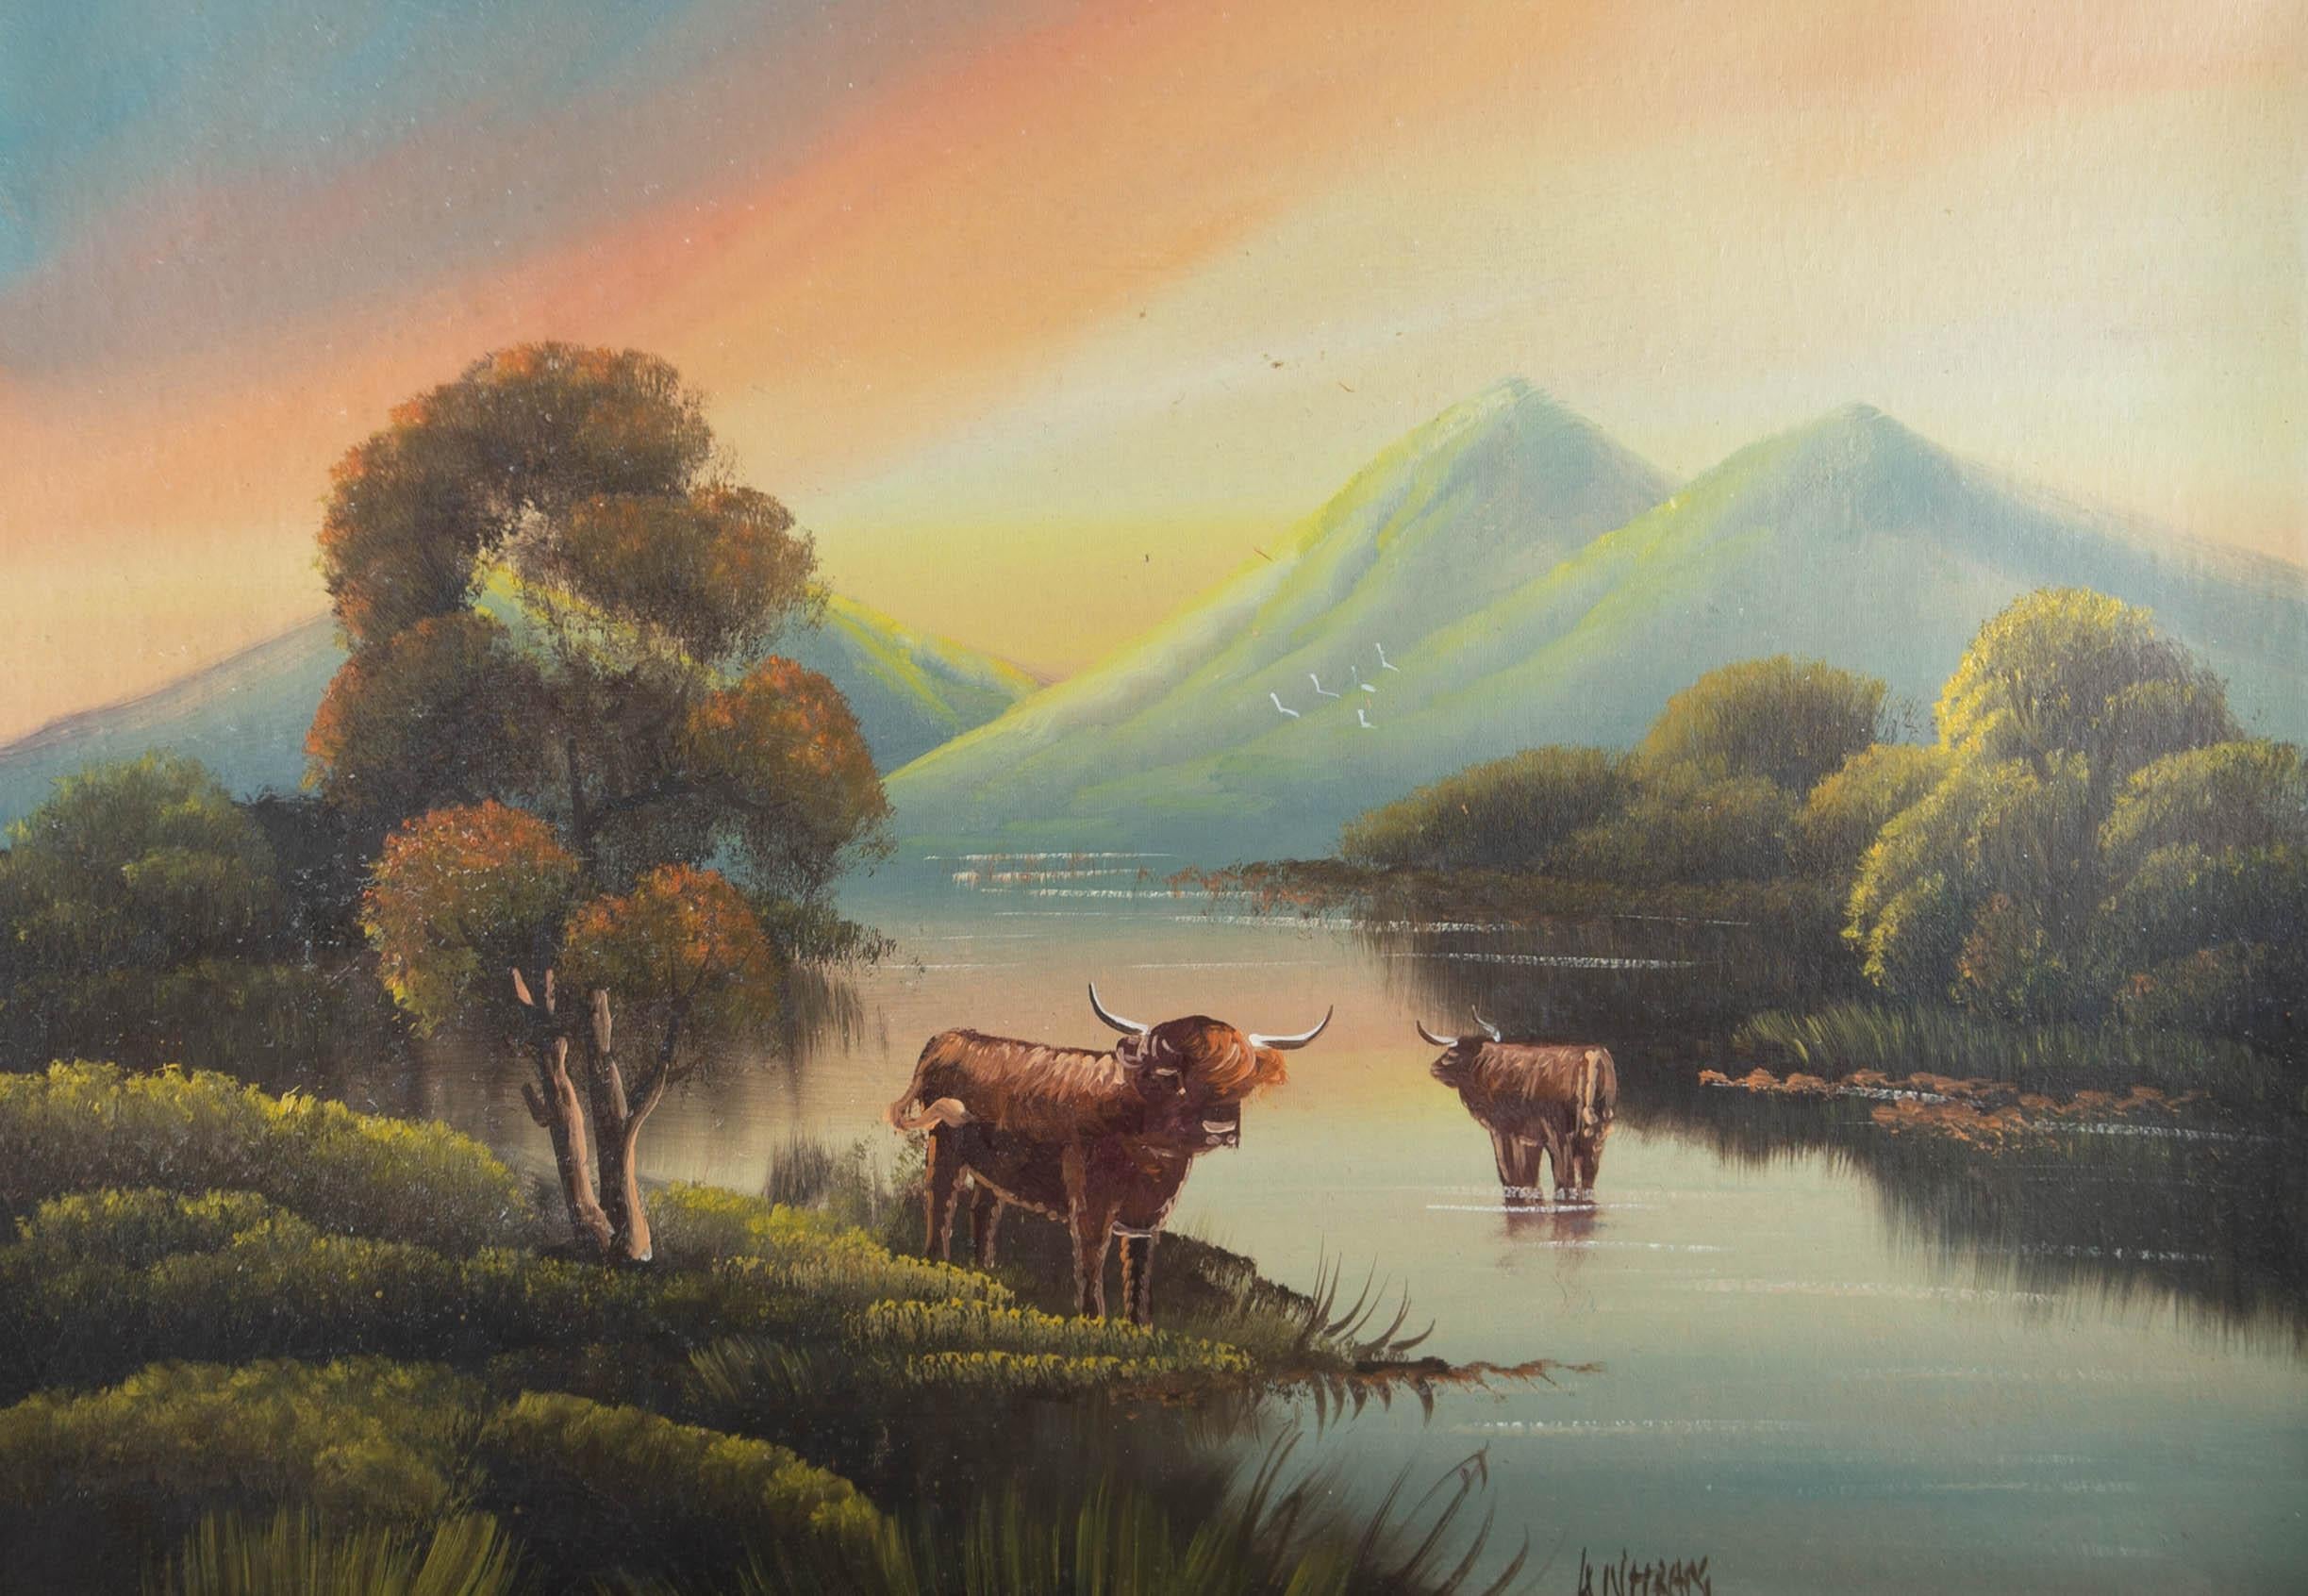 Unknown Landscape Painting - Early 20th Century Oil - Cows In The Shallows